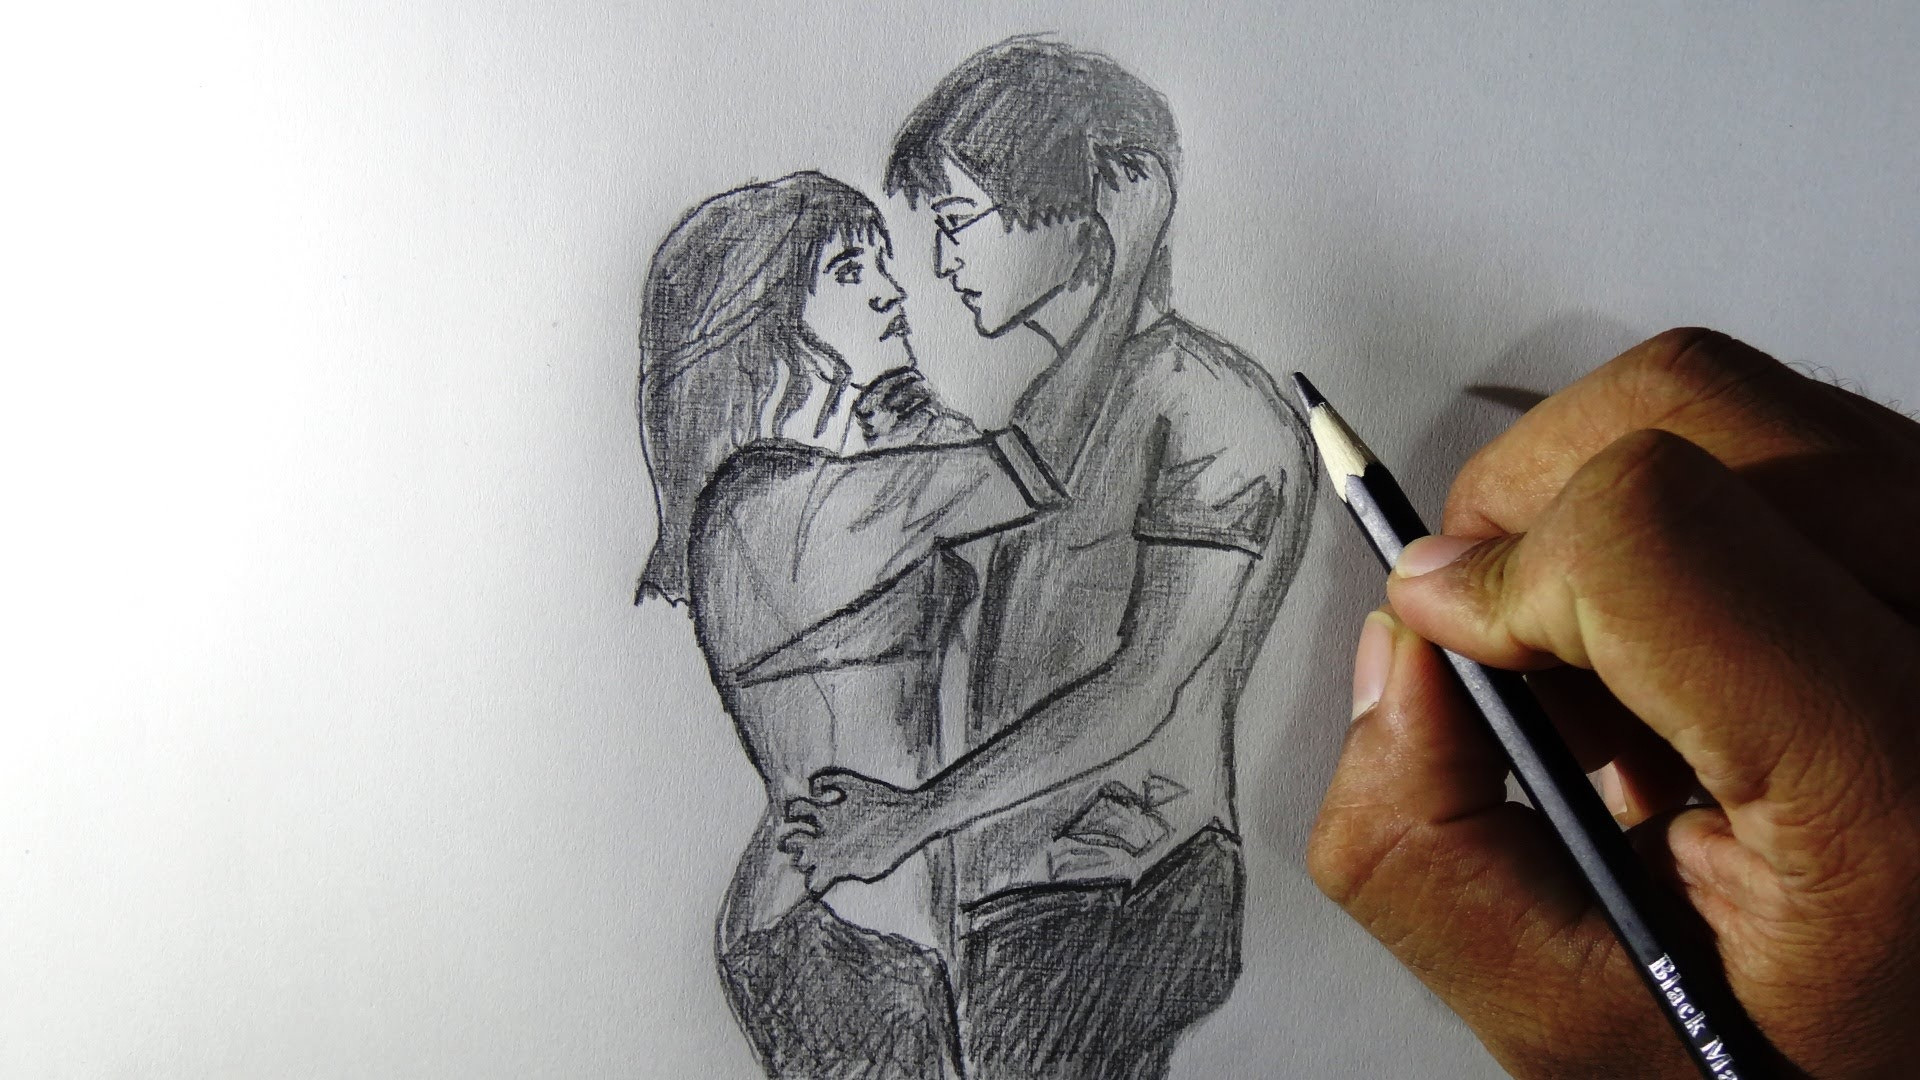 Boy and girl drawings | Pictures with a pencil for sketching